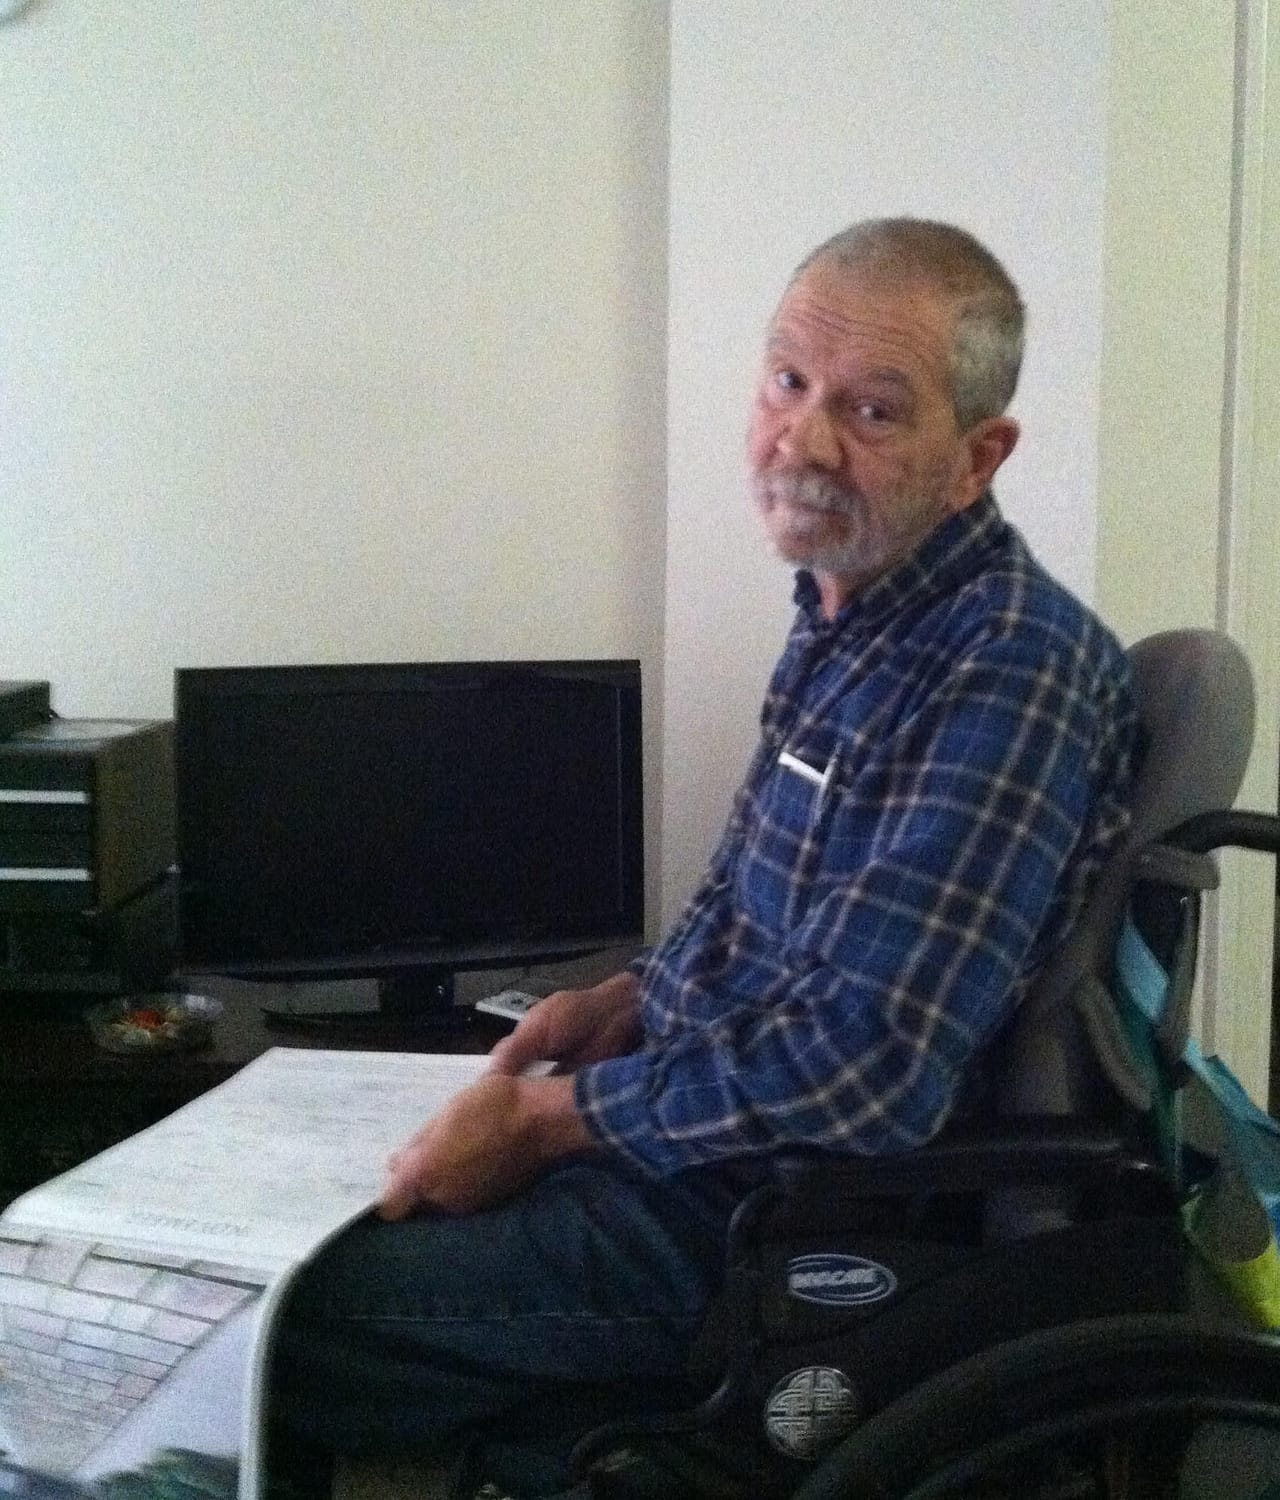 Ed Milewski, champion of Independent Living, is pictured seated in a wheelchair with his body turned to the side, but his face looking at the camera. He is wearing a blue plaid shirt and black pants. The background is simple white walls, with a computer monitor directly behind him. In his hands he is holding a folded pad of paper.